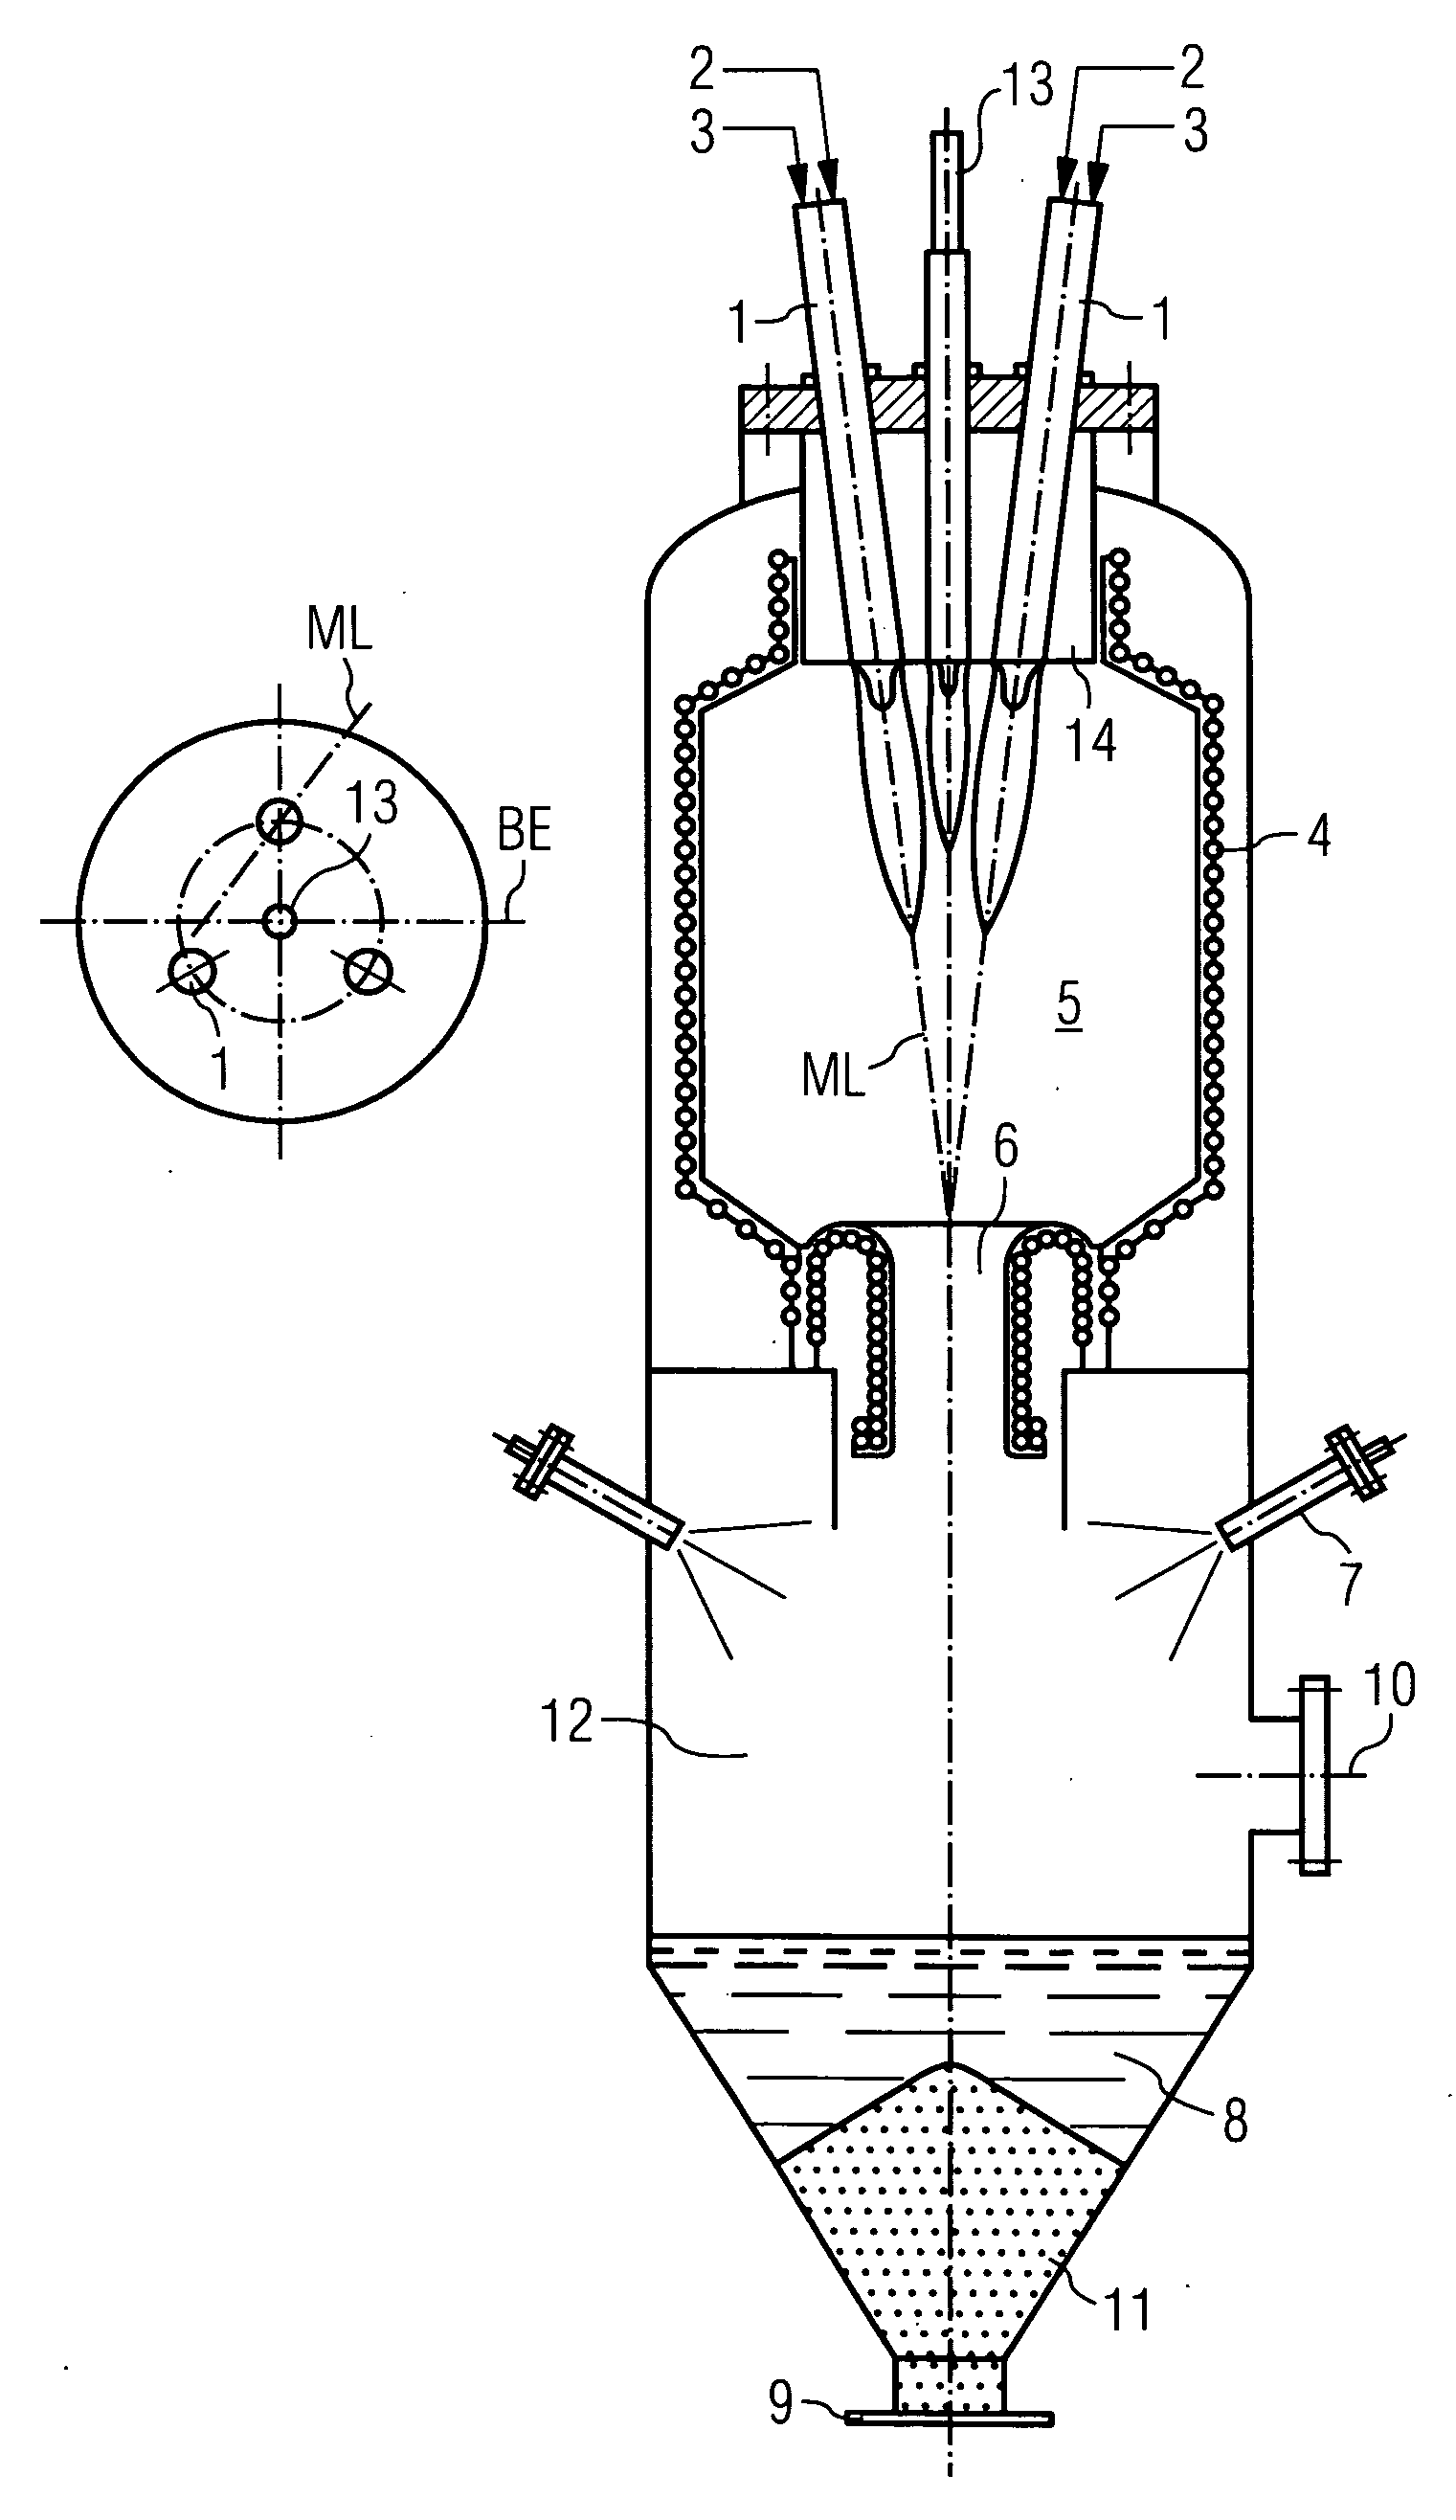 Entrained flow reactor for gasifying solid and liquid energy sources